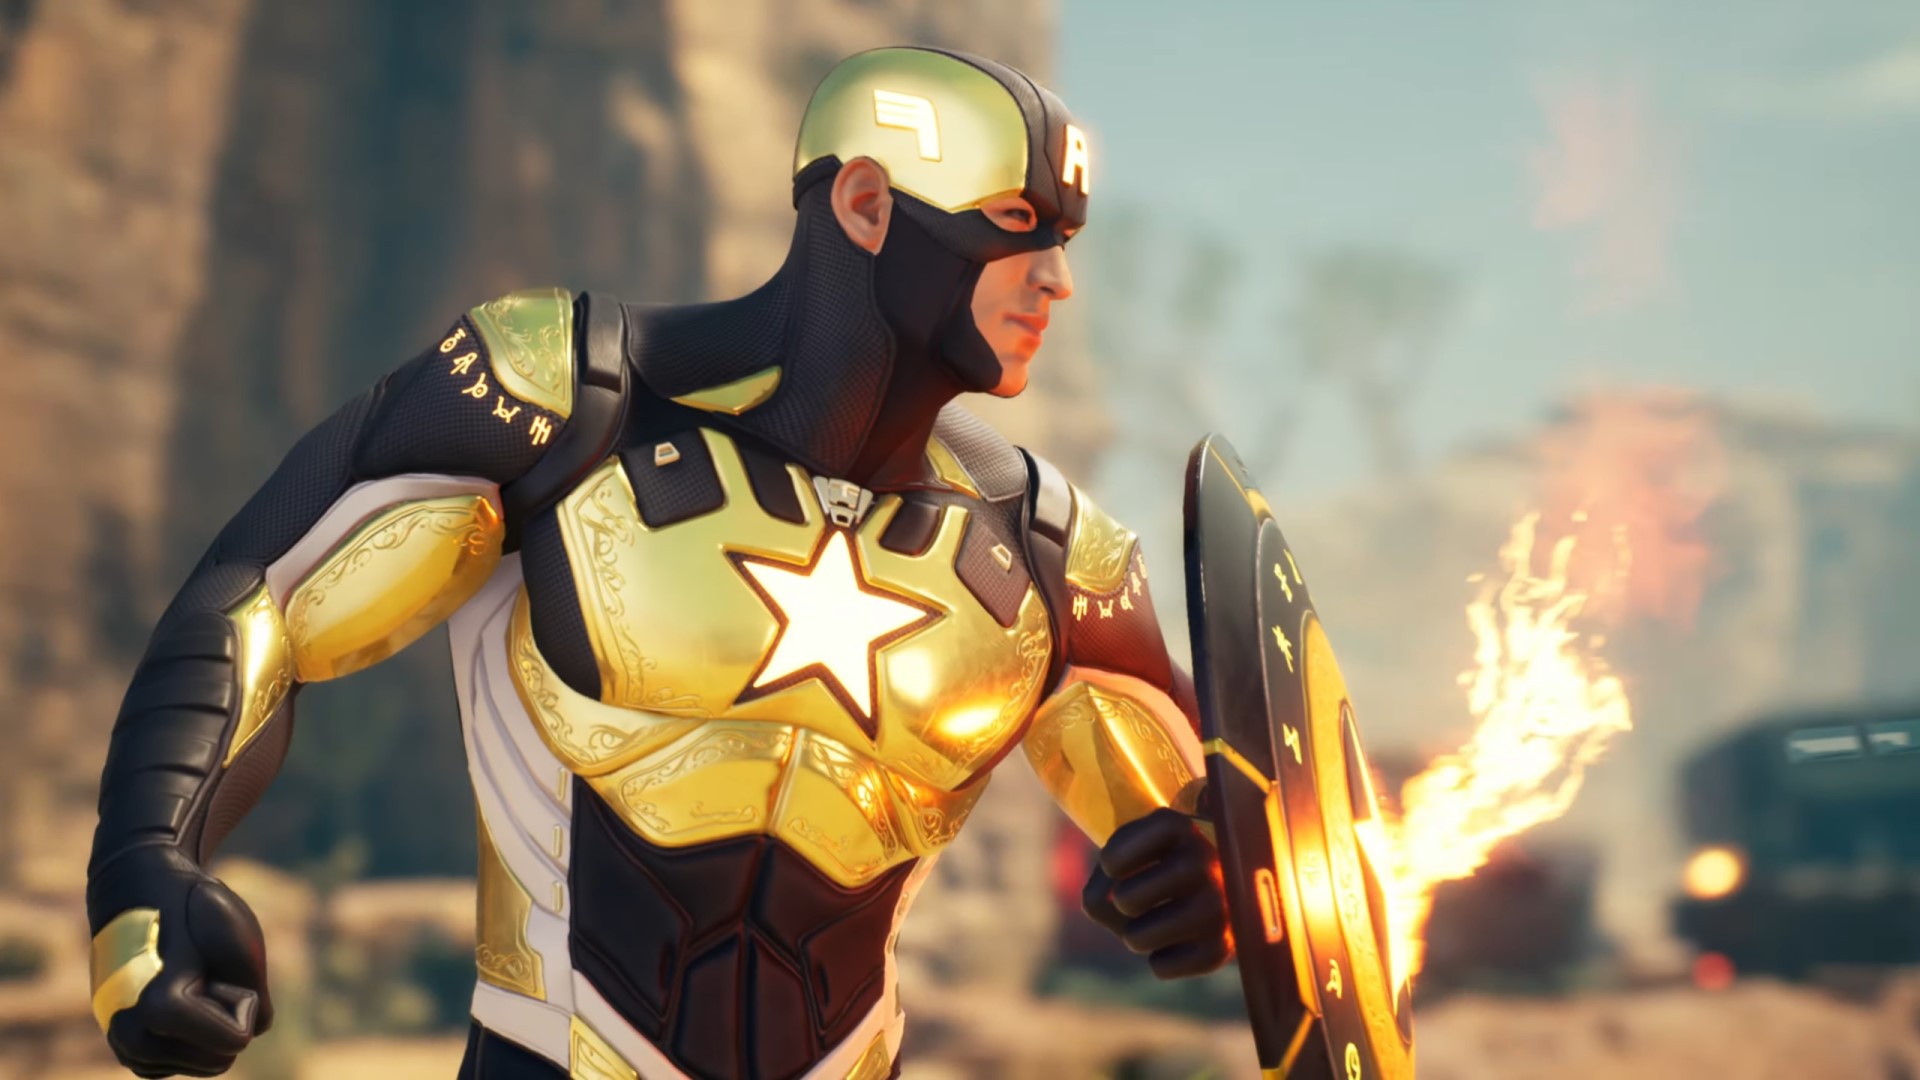 Marvel's Midnight Suns release date, gameplay and latest news